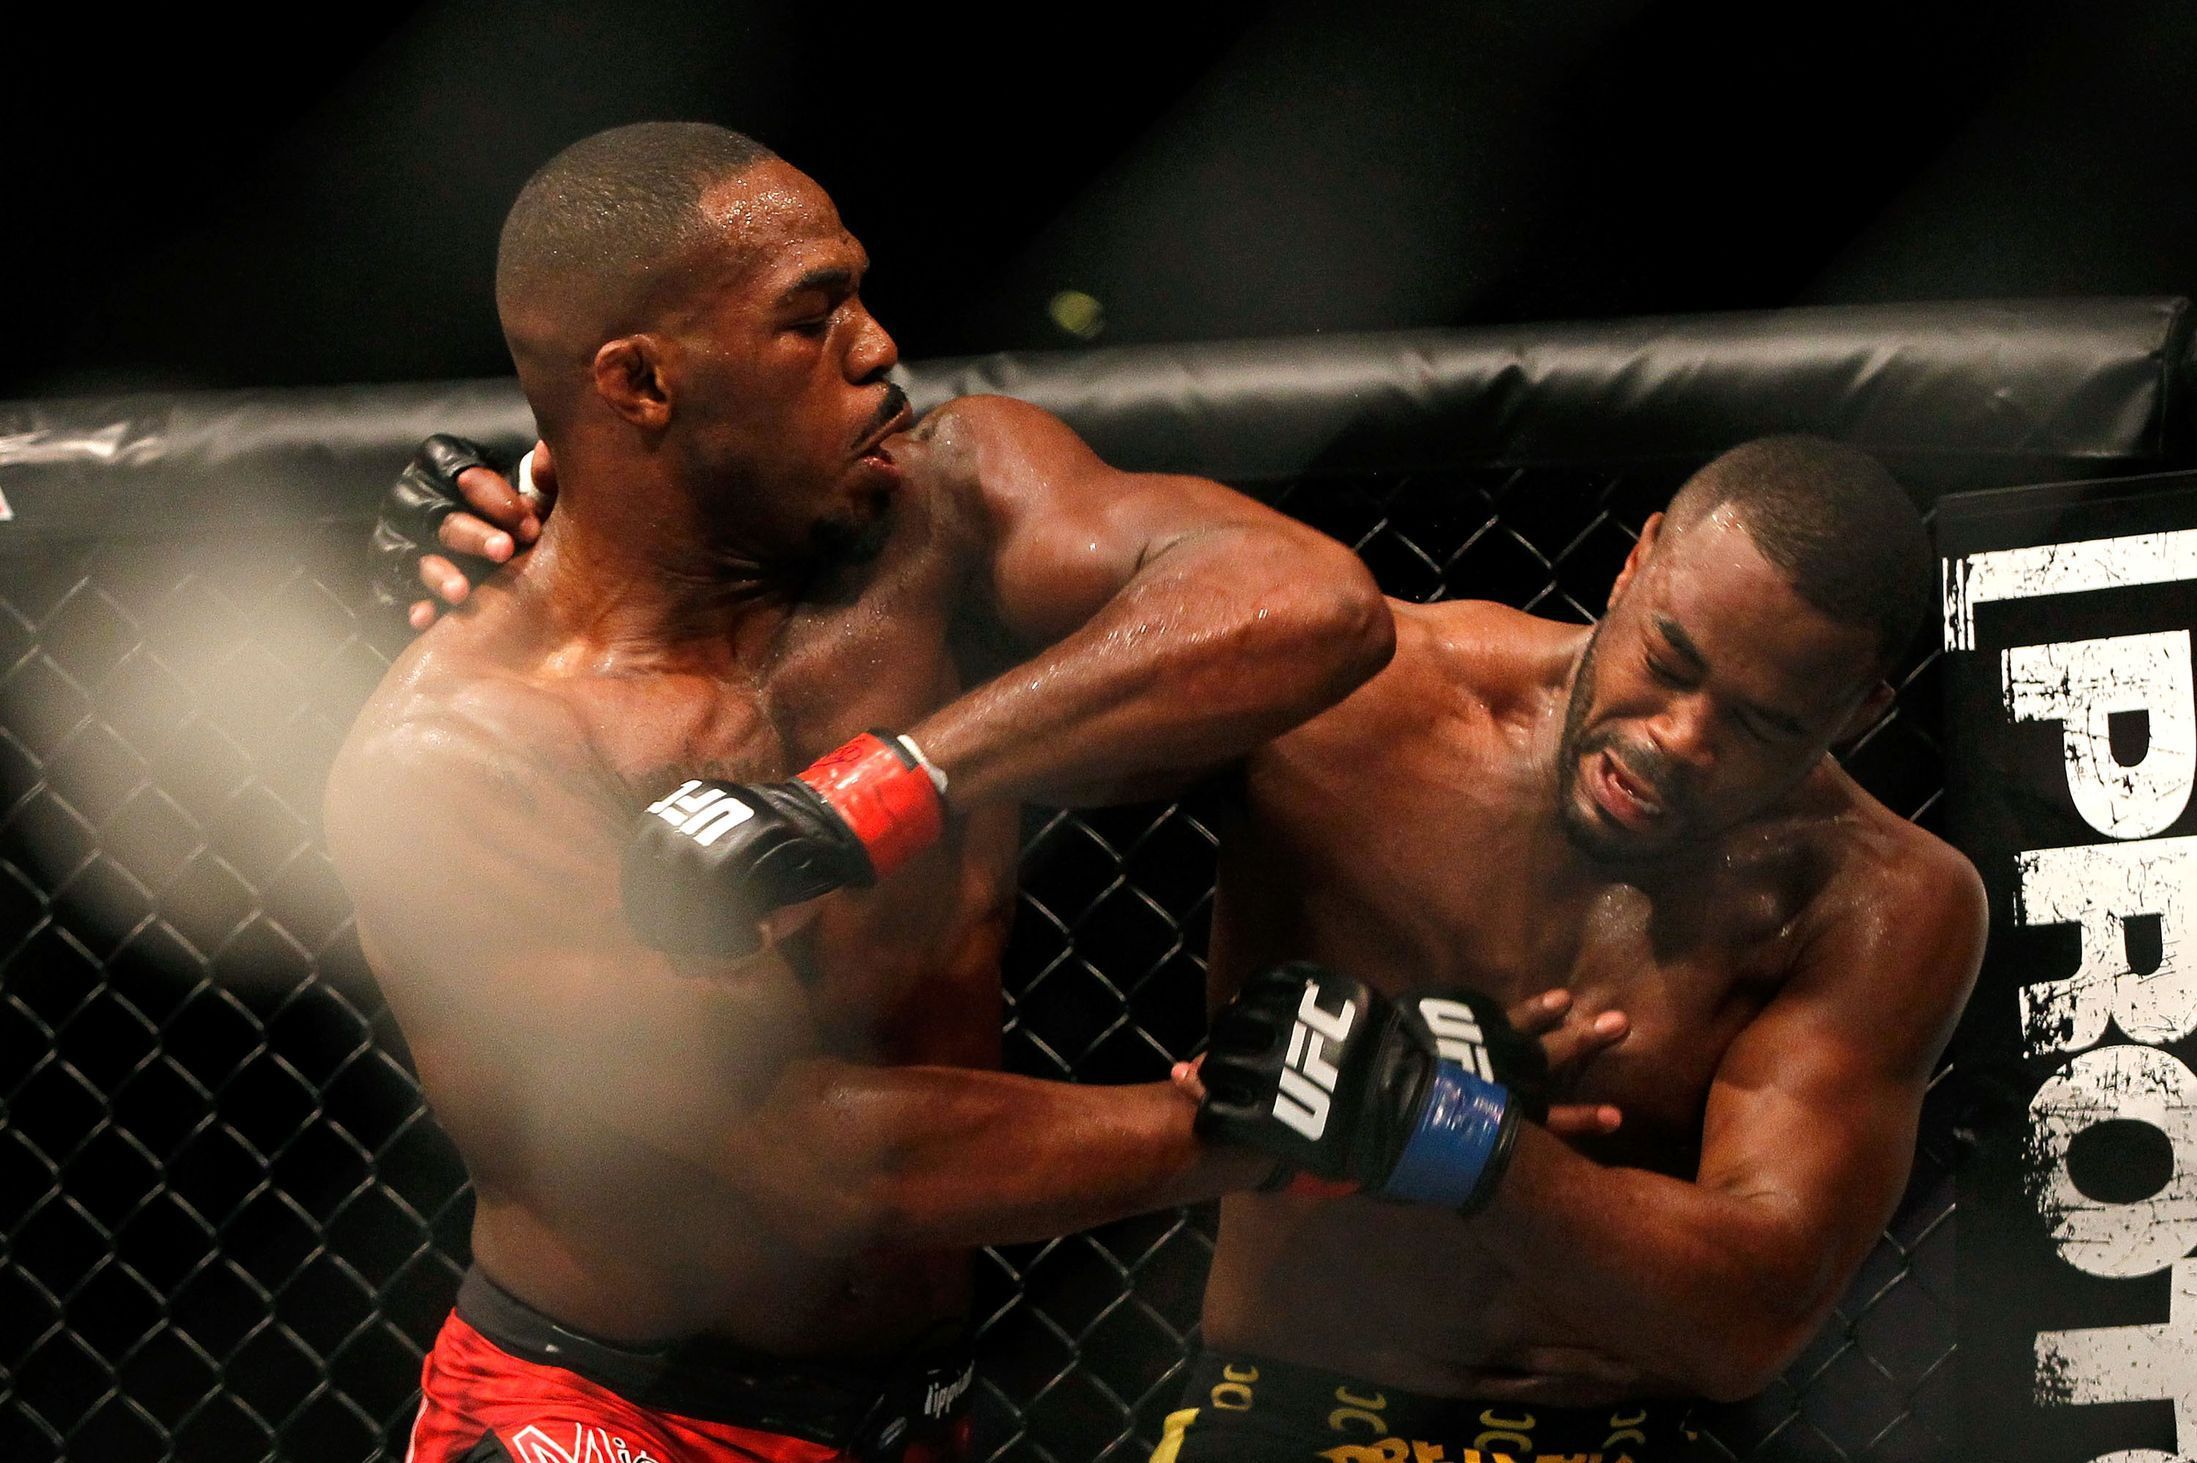 Fearless UFC fighter Jon Jones wallpapers and images - wallpapers ...